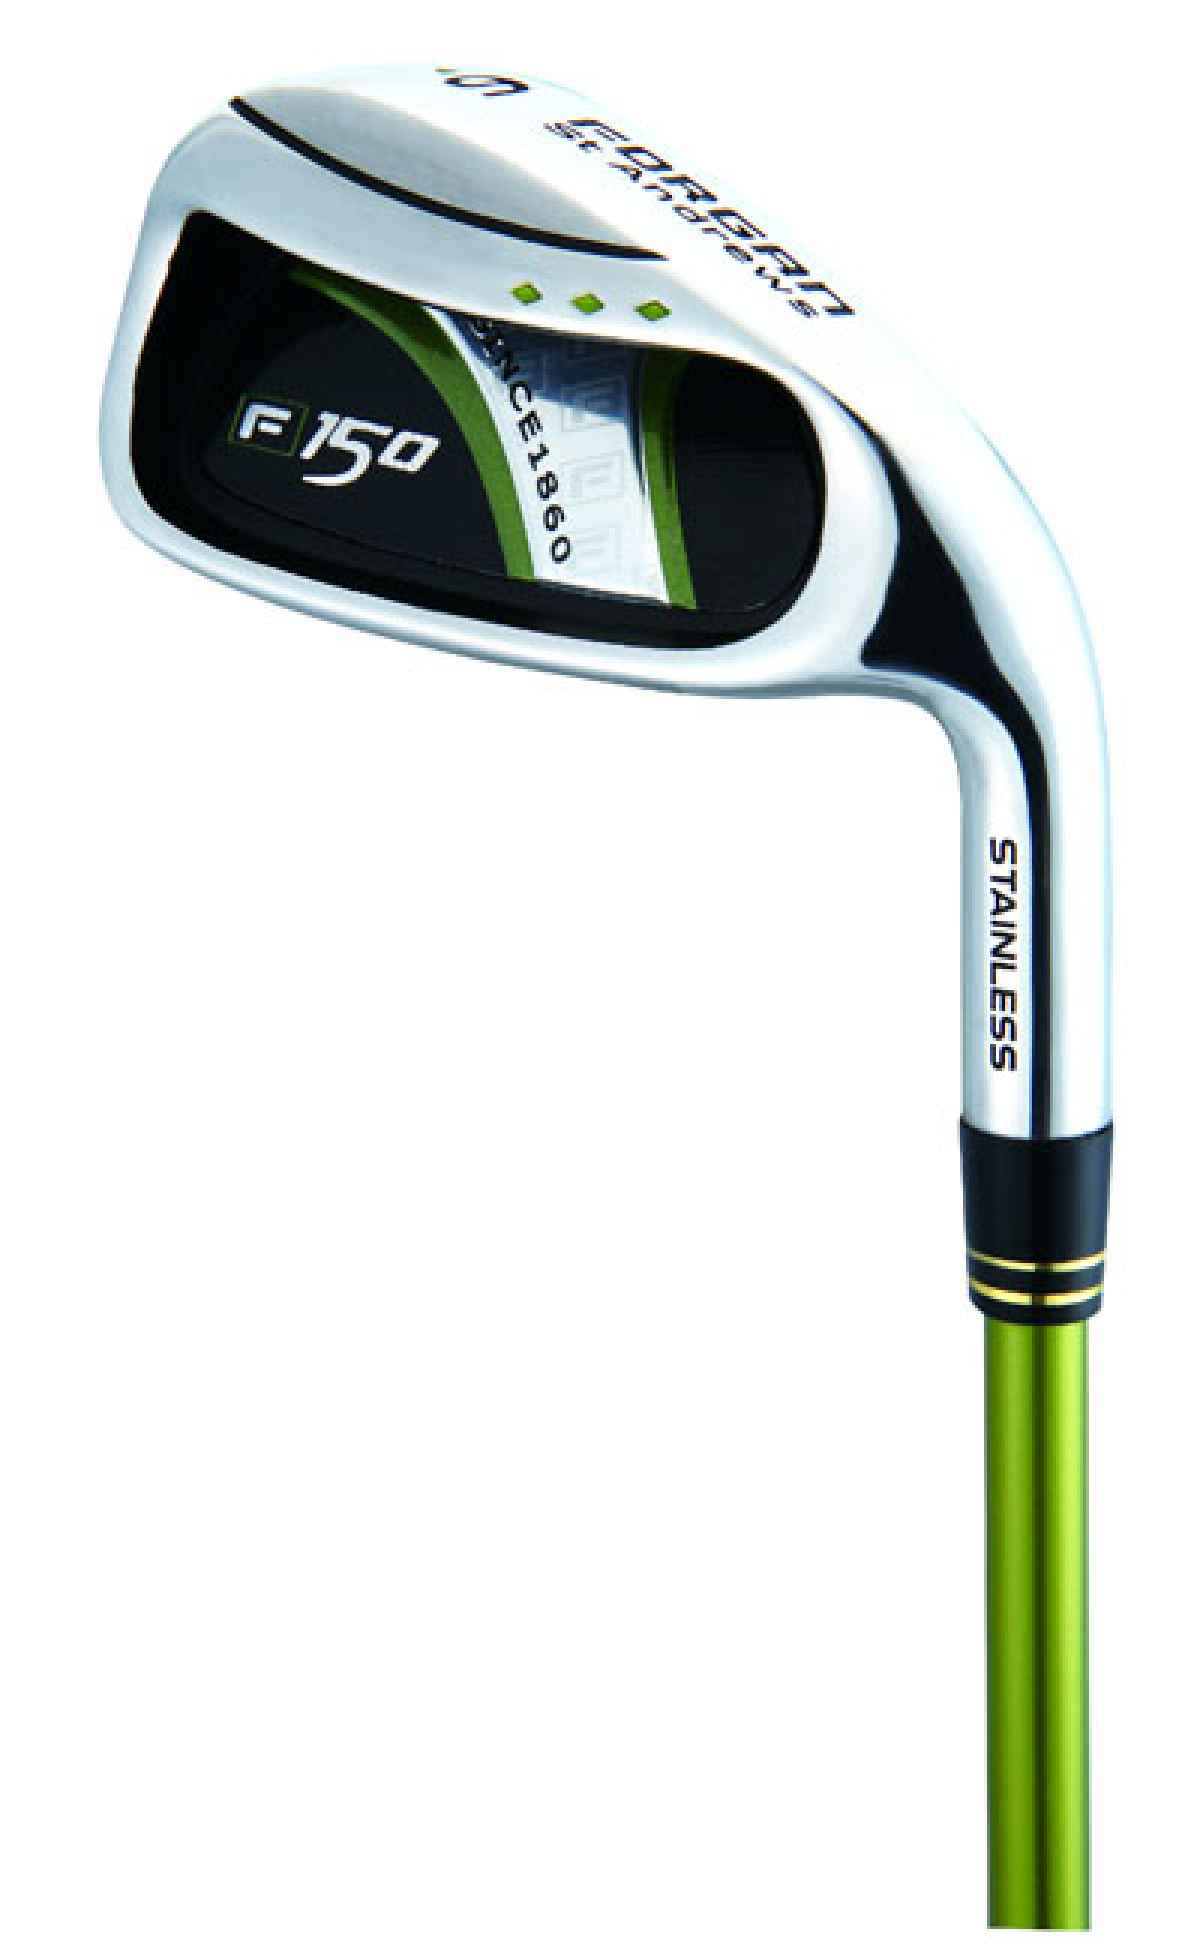 Forgan introduces two new irons sets